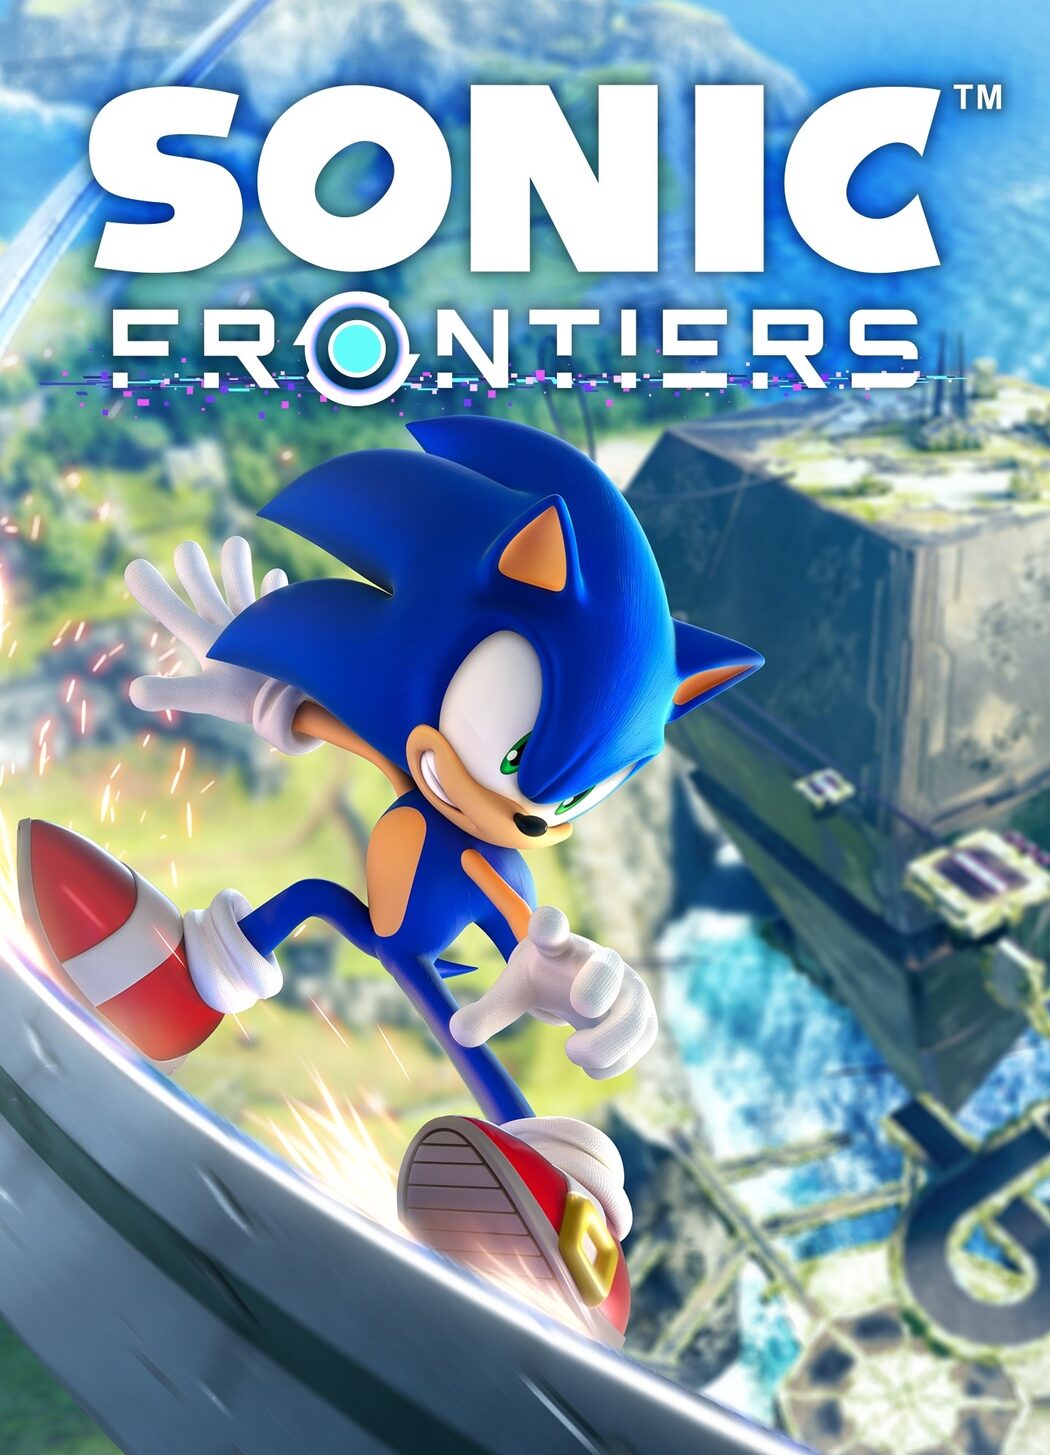 Sonic Frontiers PC Full System Requirements Revealed